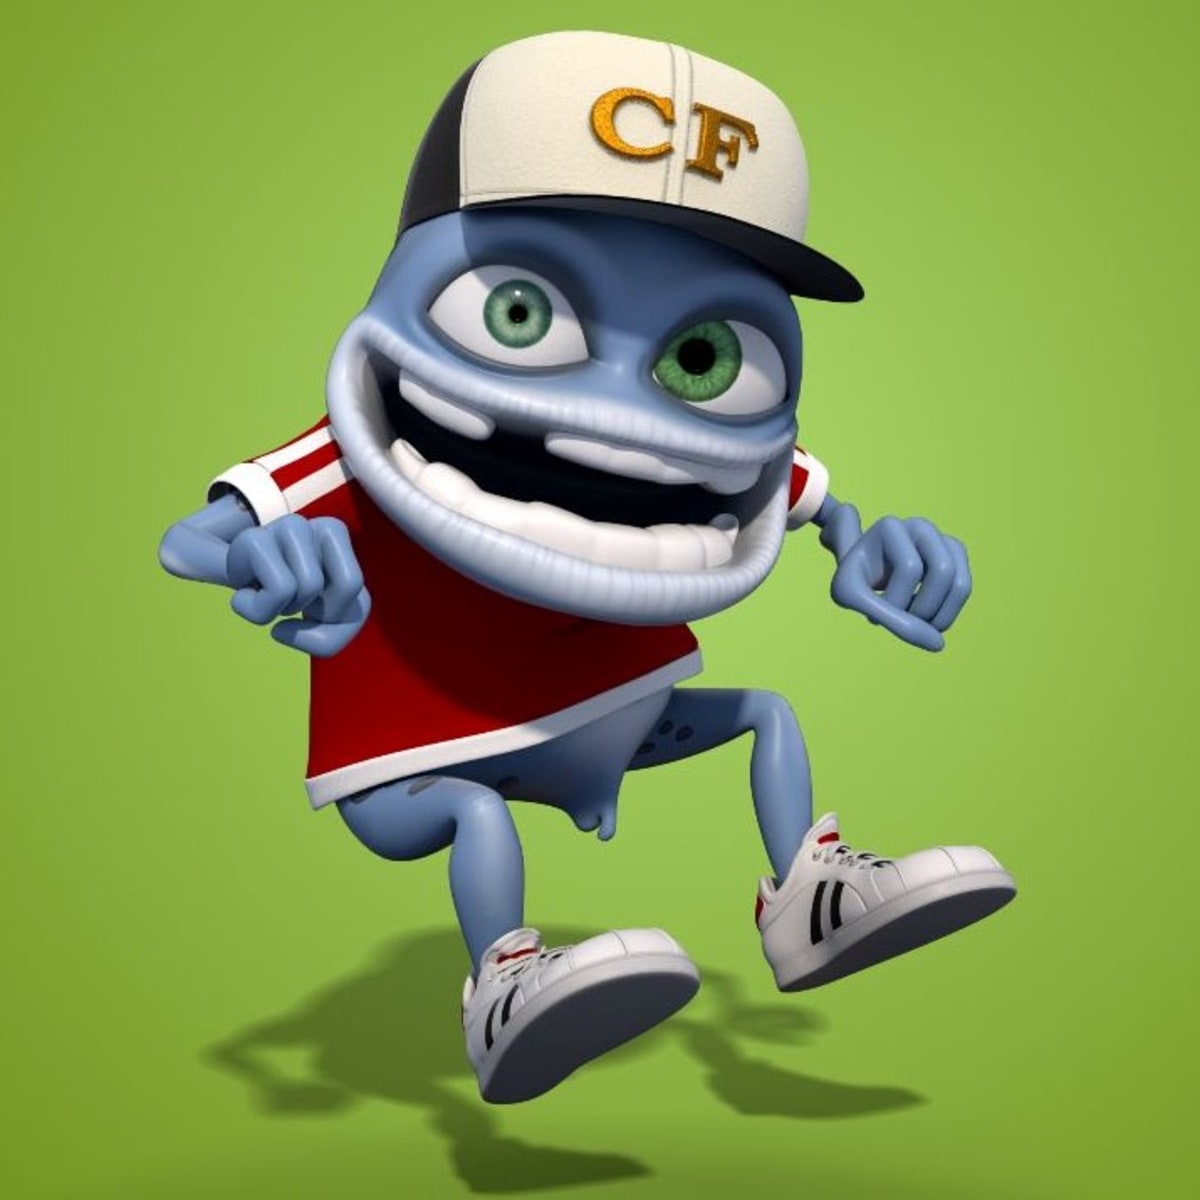 Crazy Frog Returns After 15 Years With Intergalactic Mashup of Run-DMC's  